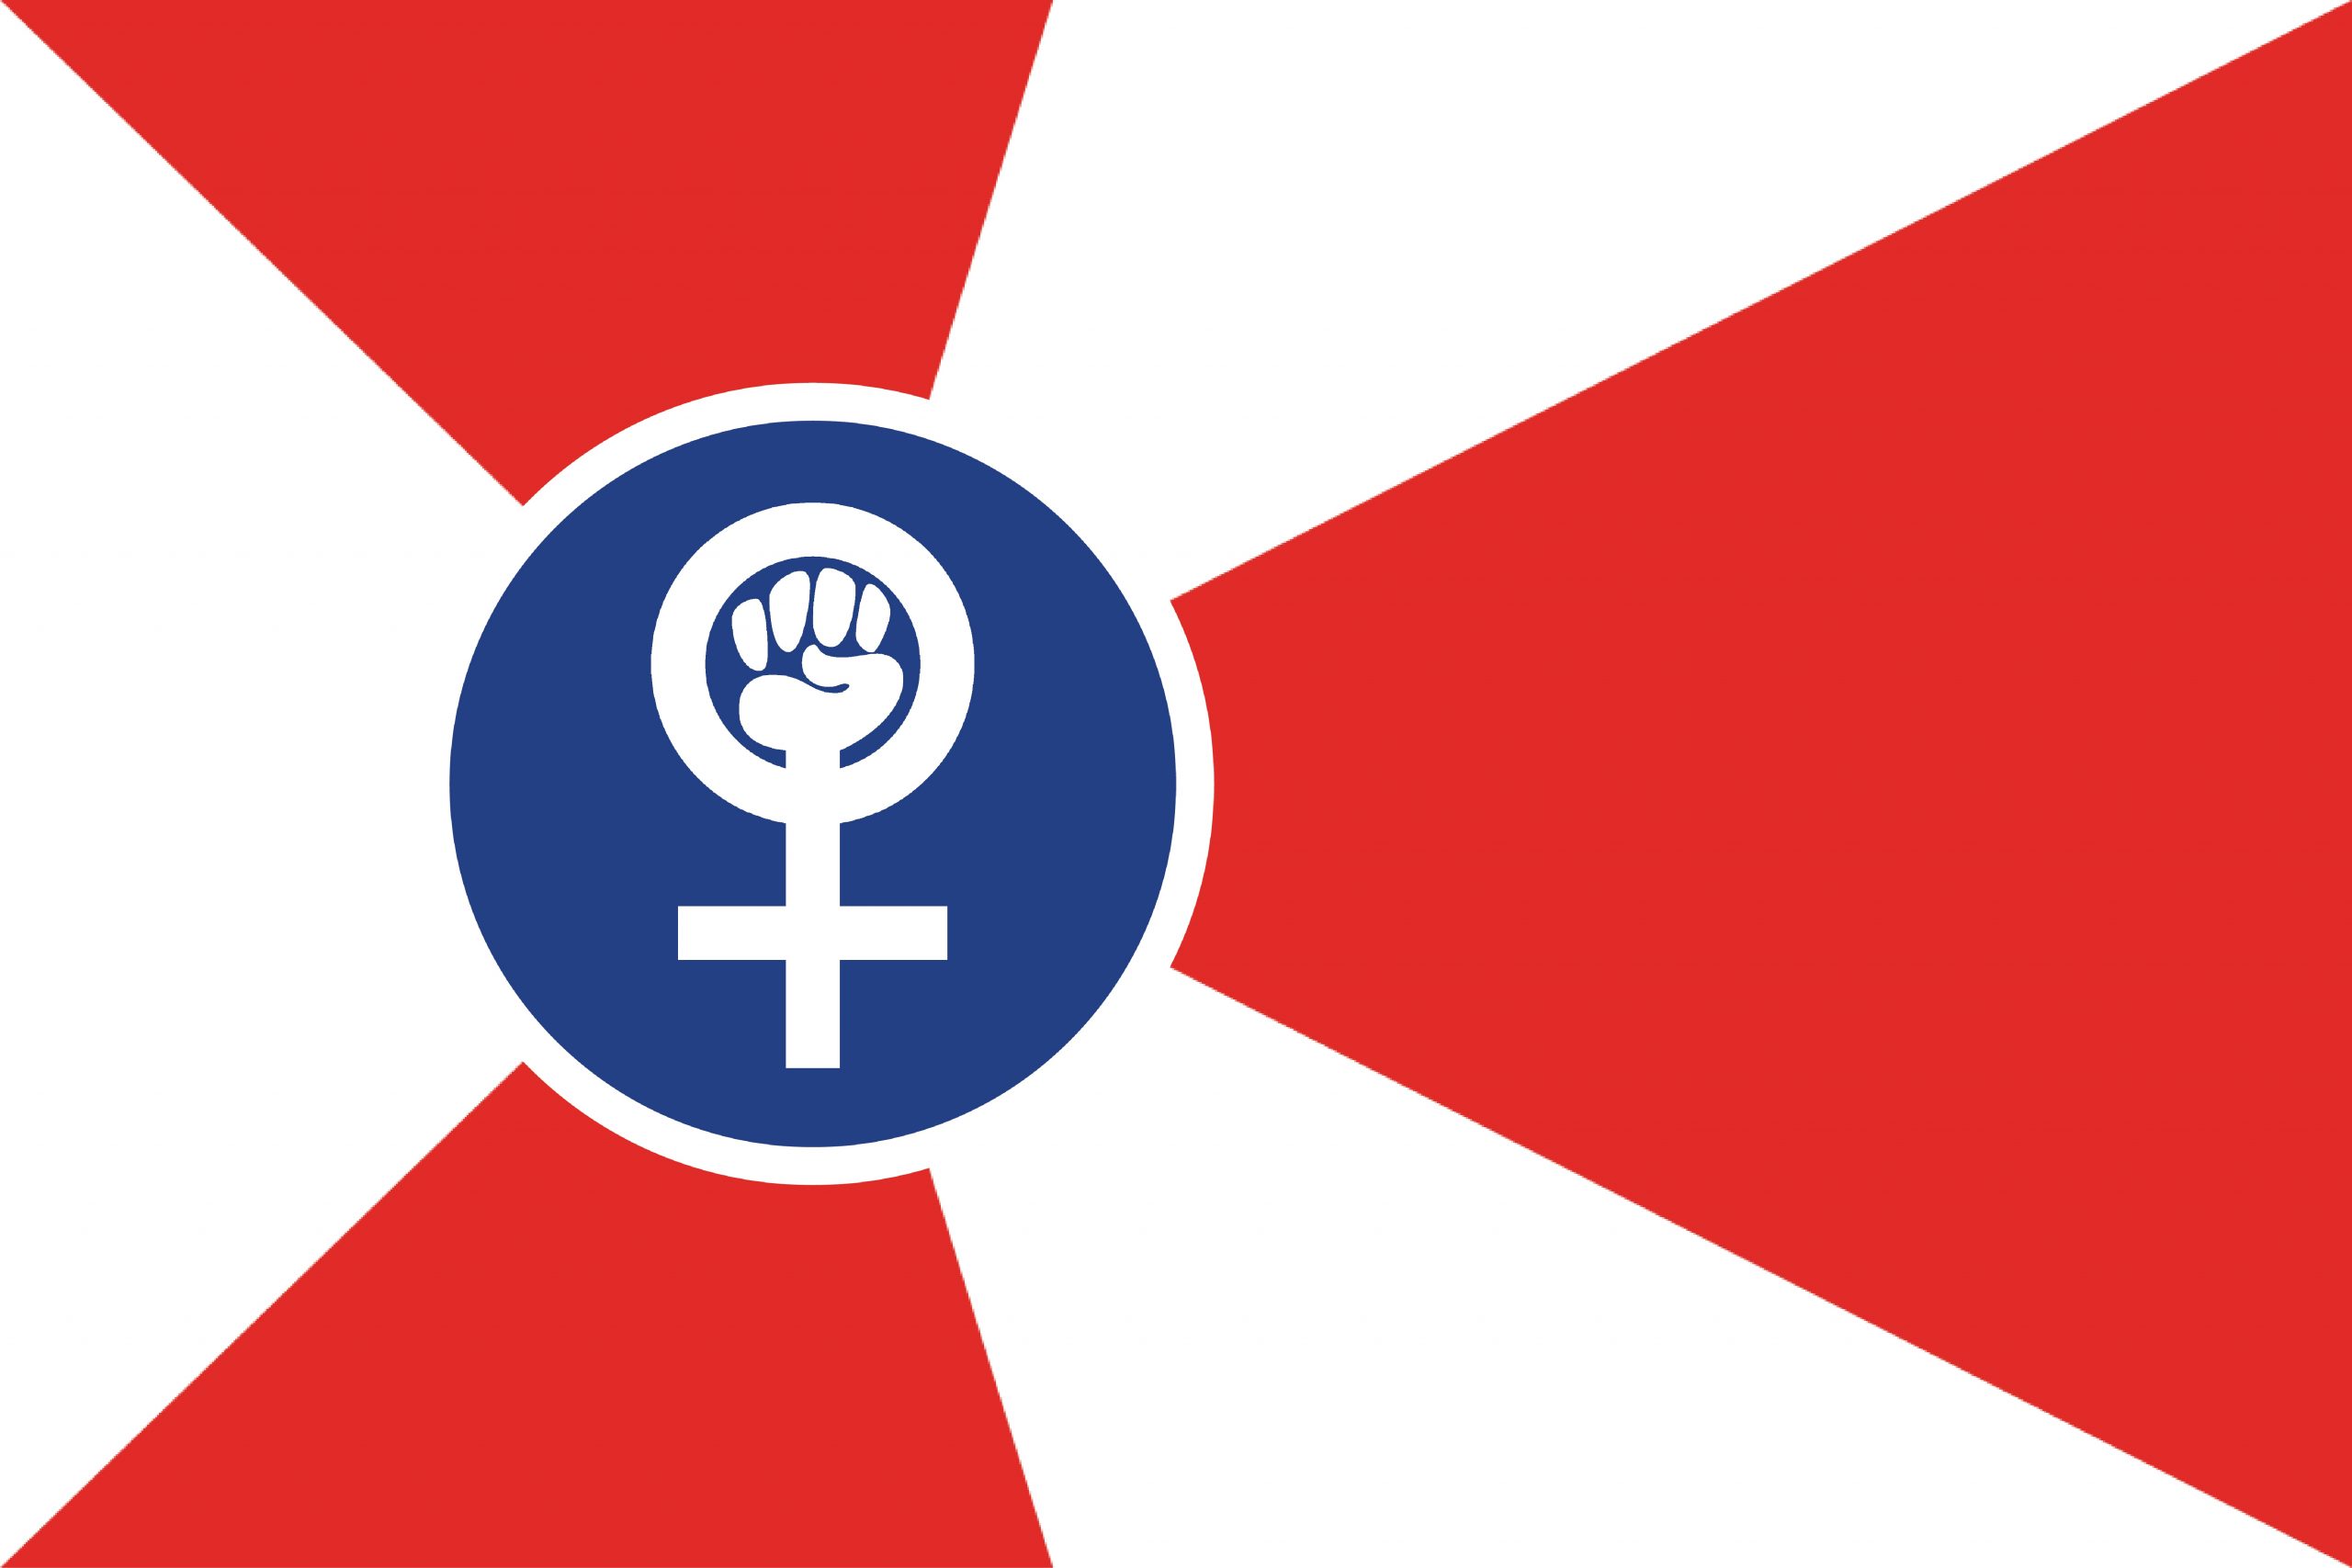 image of the Wichita flag with a feminist female symbol in place of the hogan symbol.